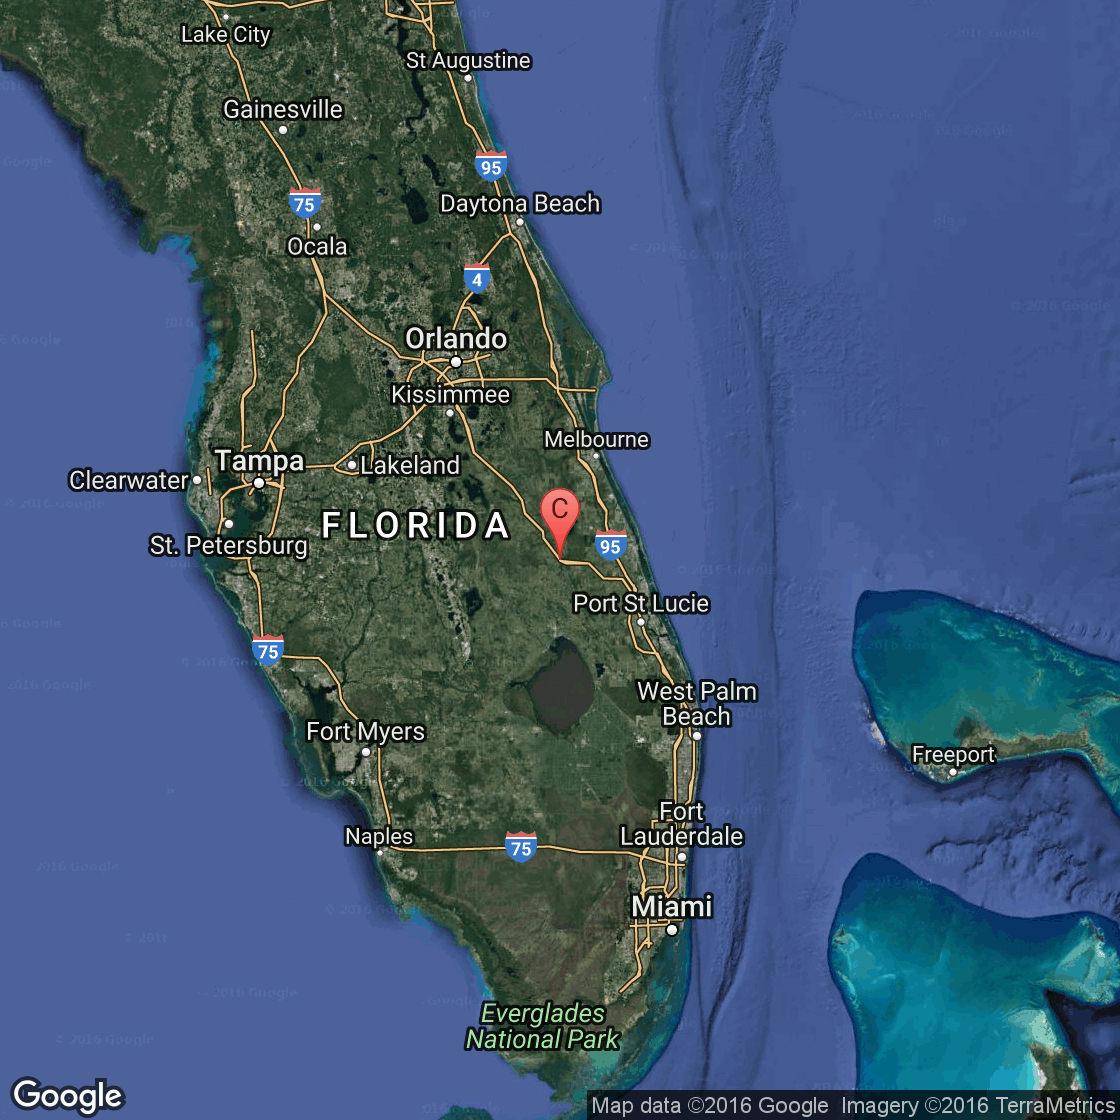 Hotels Near The Florida Turnpike In Kissimmee | Usa Today - Map Of Hotels In Kissimmee Florida